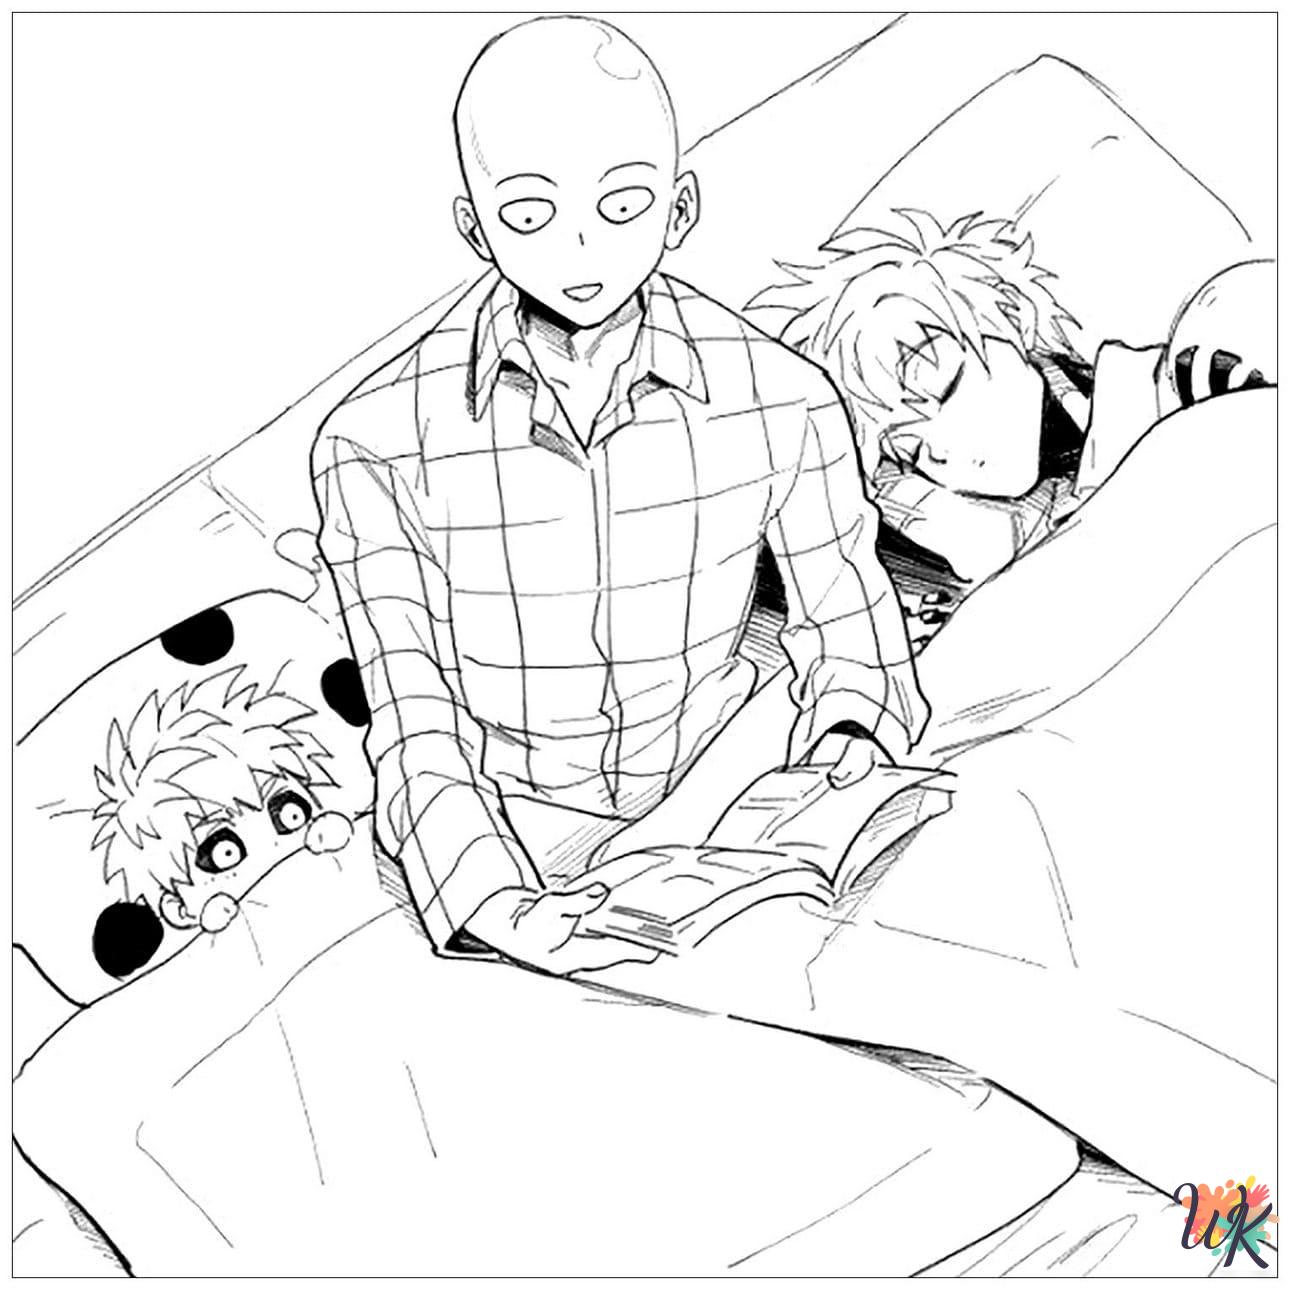 detailed One-Punch Man coloring pages for adults